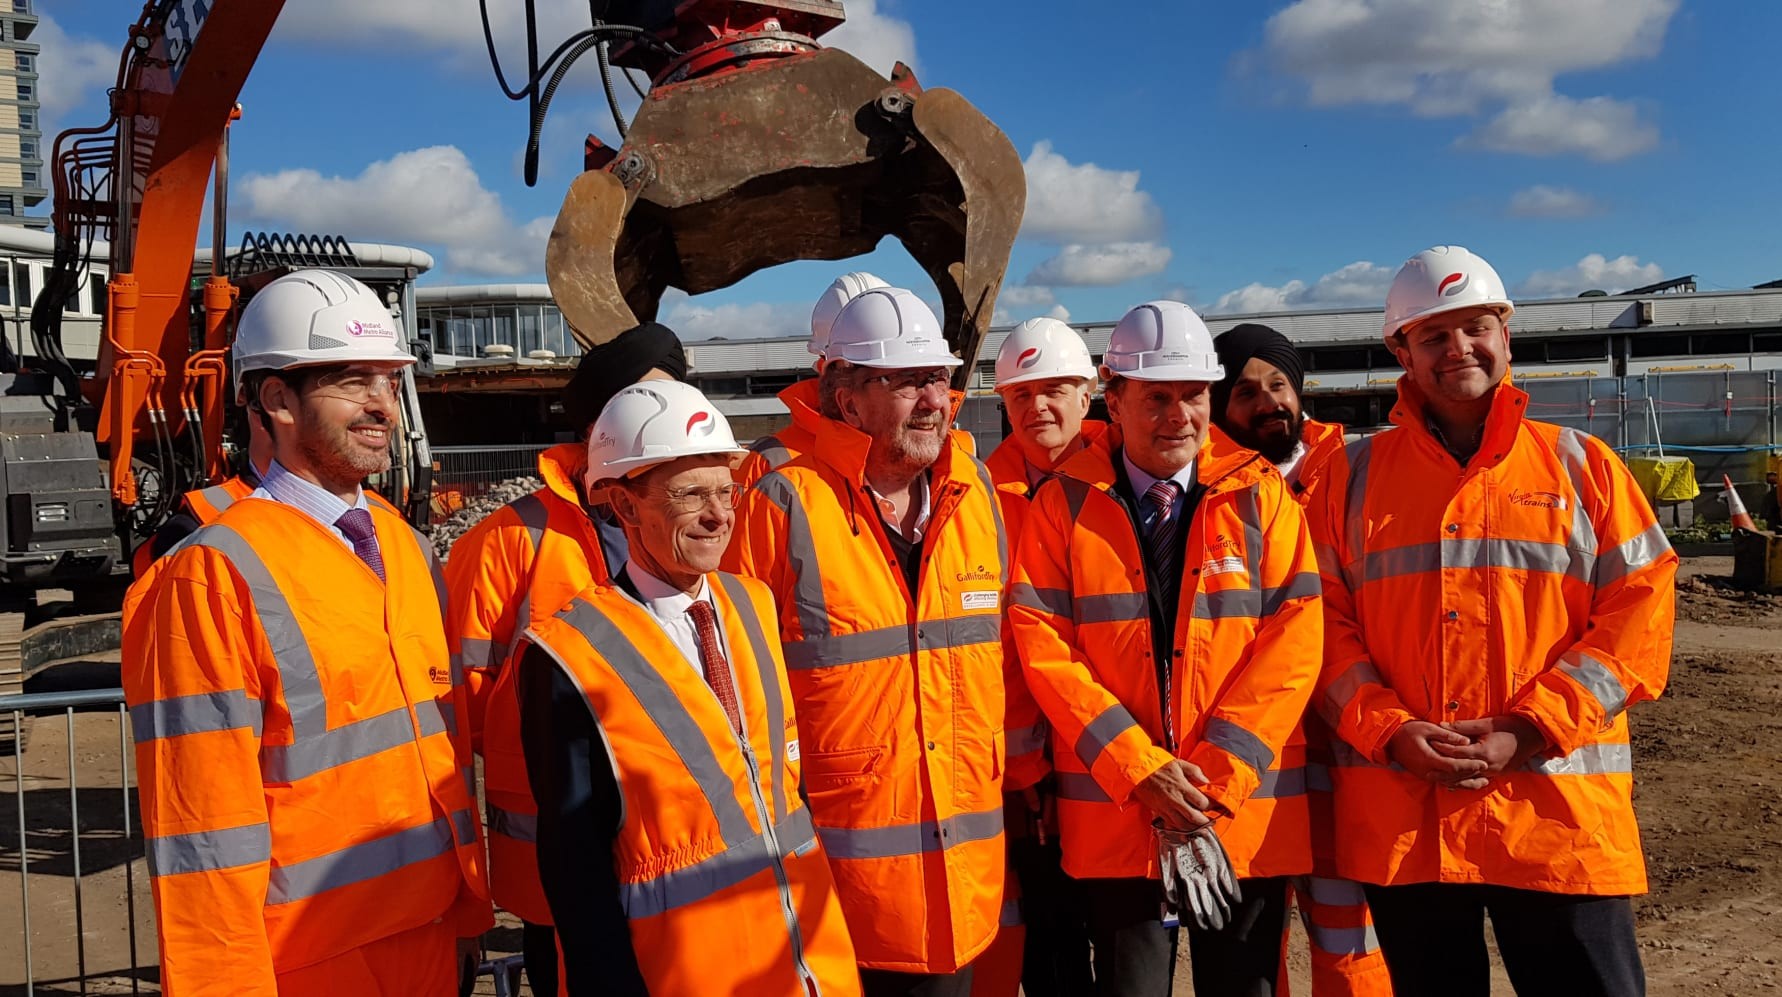 Historic day as full demolition starts on city railway station